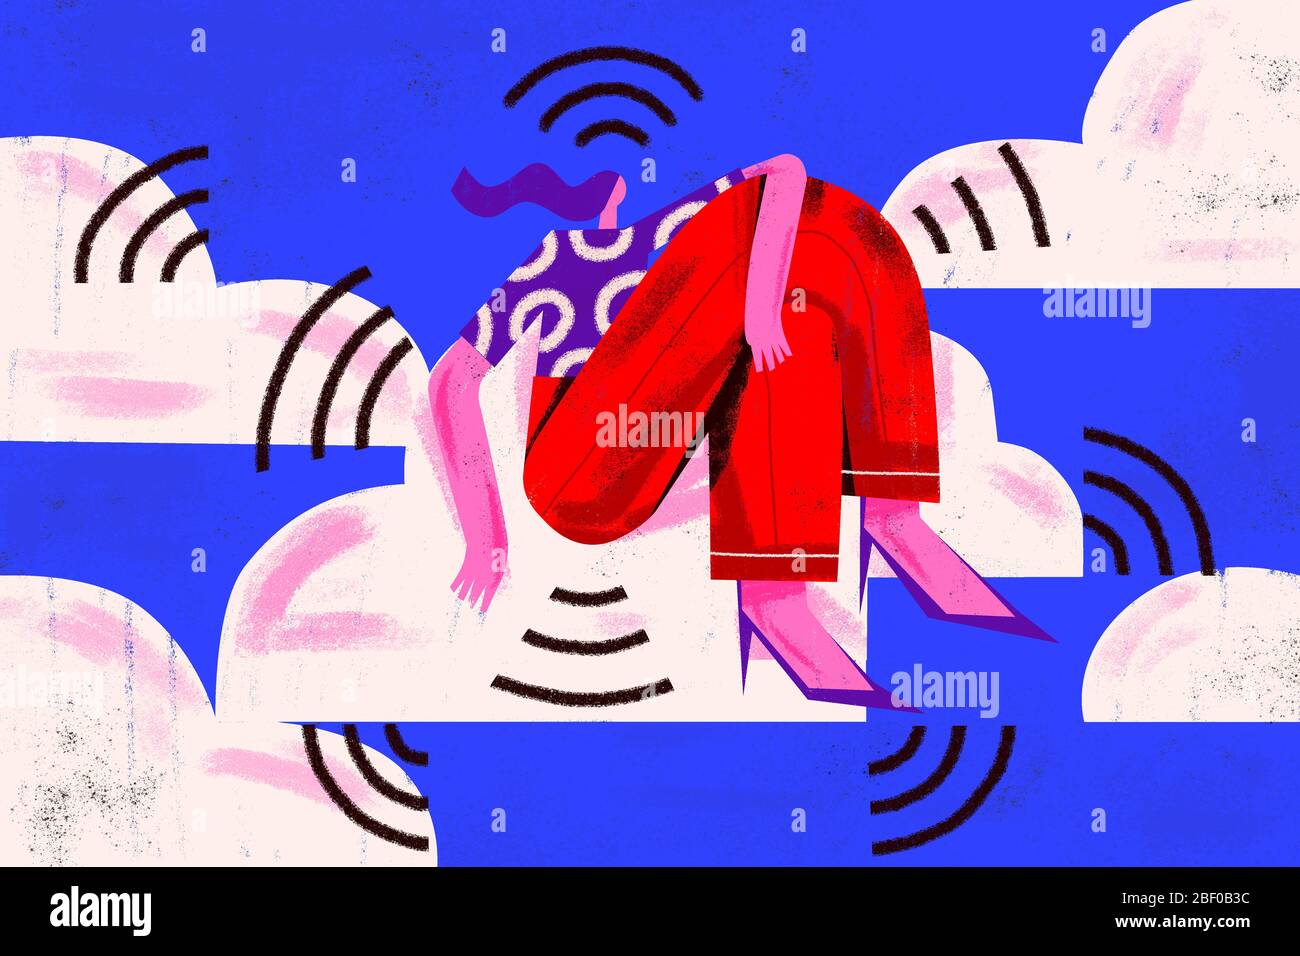 Stay connected concept. Social media and telecommunication technologies illustration. Young woman sits in clouds surrounded by Wi-Fi signal symbols. Stock Photo